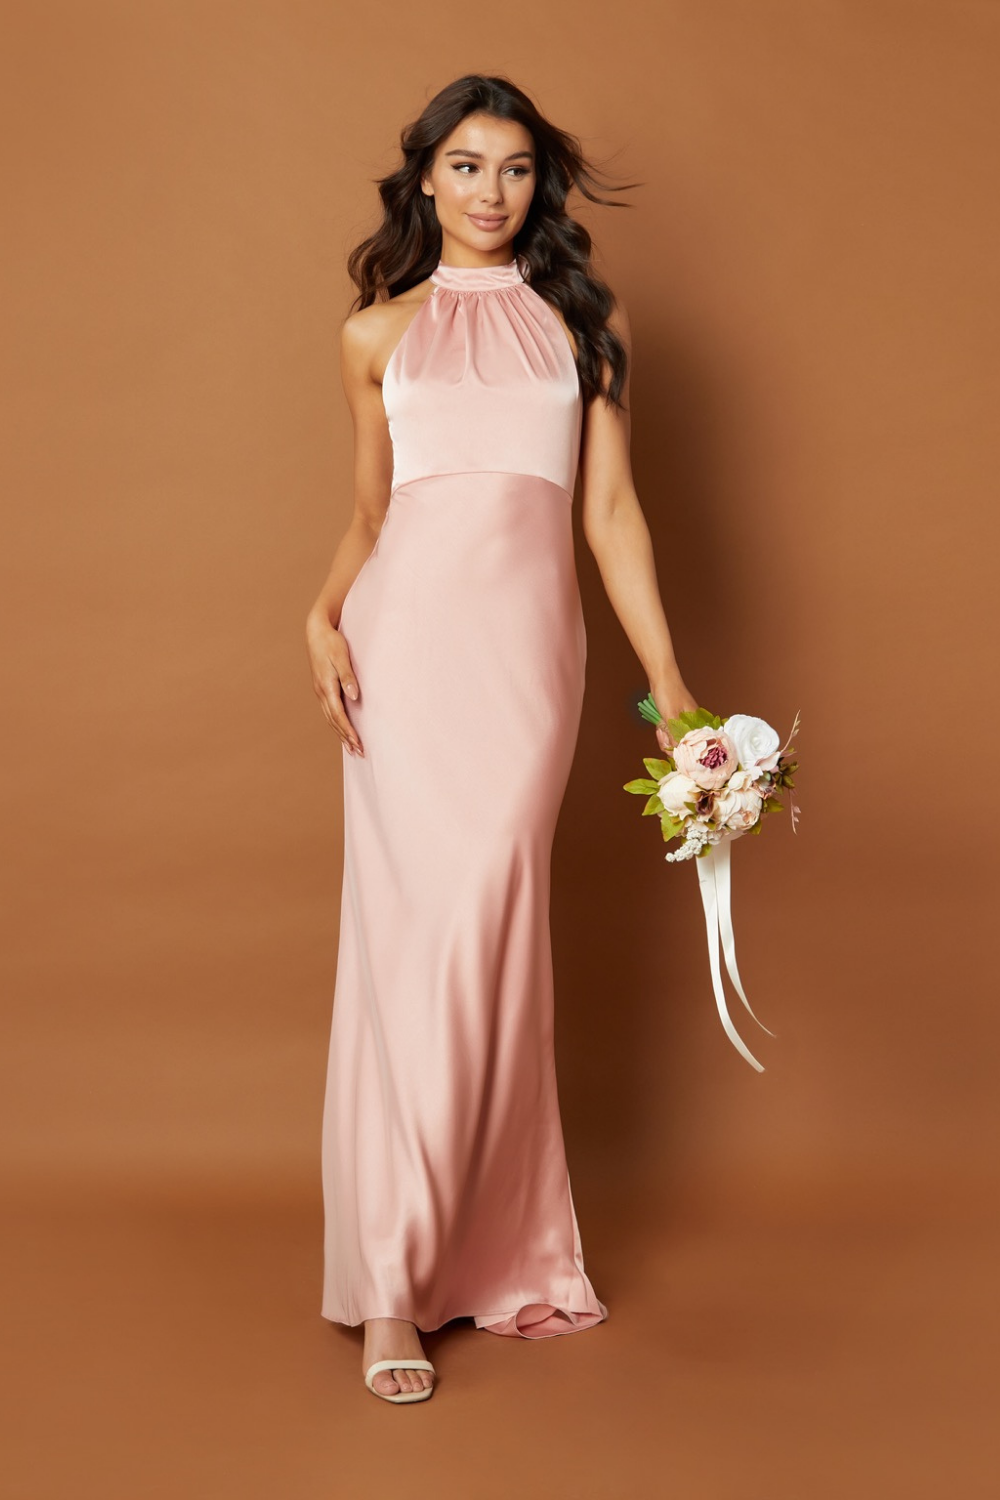 Starlette Halter Neck Maxi Dress with Back Tie and Button Back Detail, UK 10 / US 6 / EU 38 / Blush